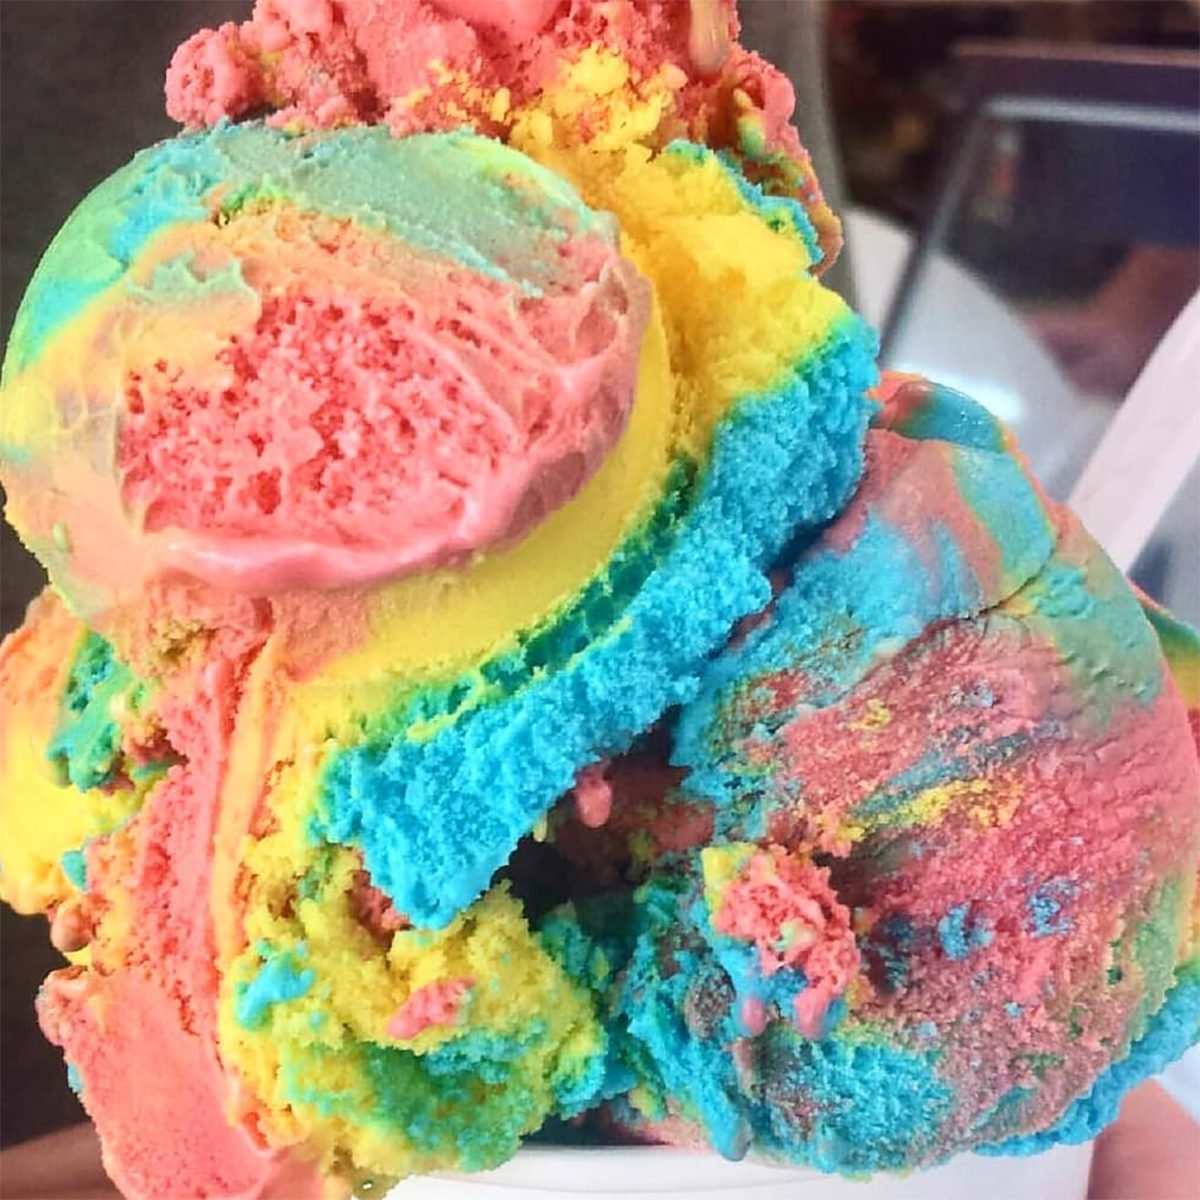 The Most Iconic Ice Cream Taste in Each State